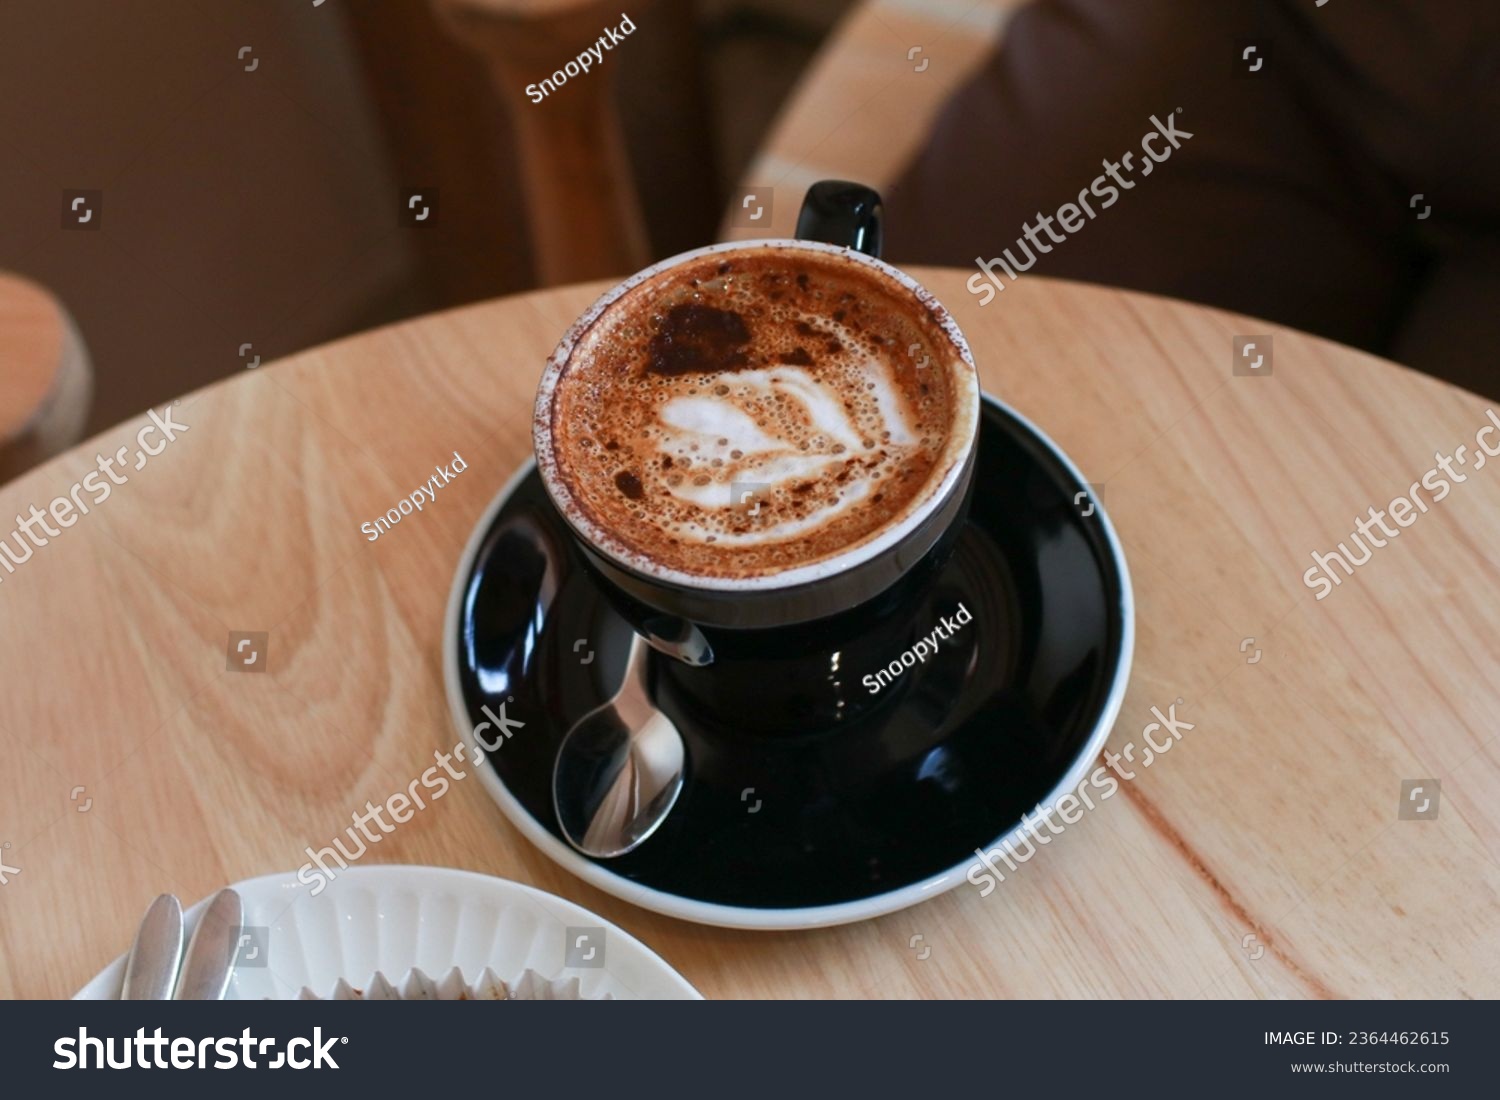 Hot coffee with latte art in black  ceramic cup on wooden table. Cappuccino or latte with frothy foam milk. Cafe and bar, barista art concept. #2364462615